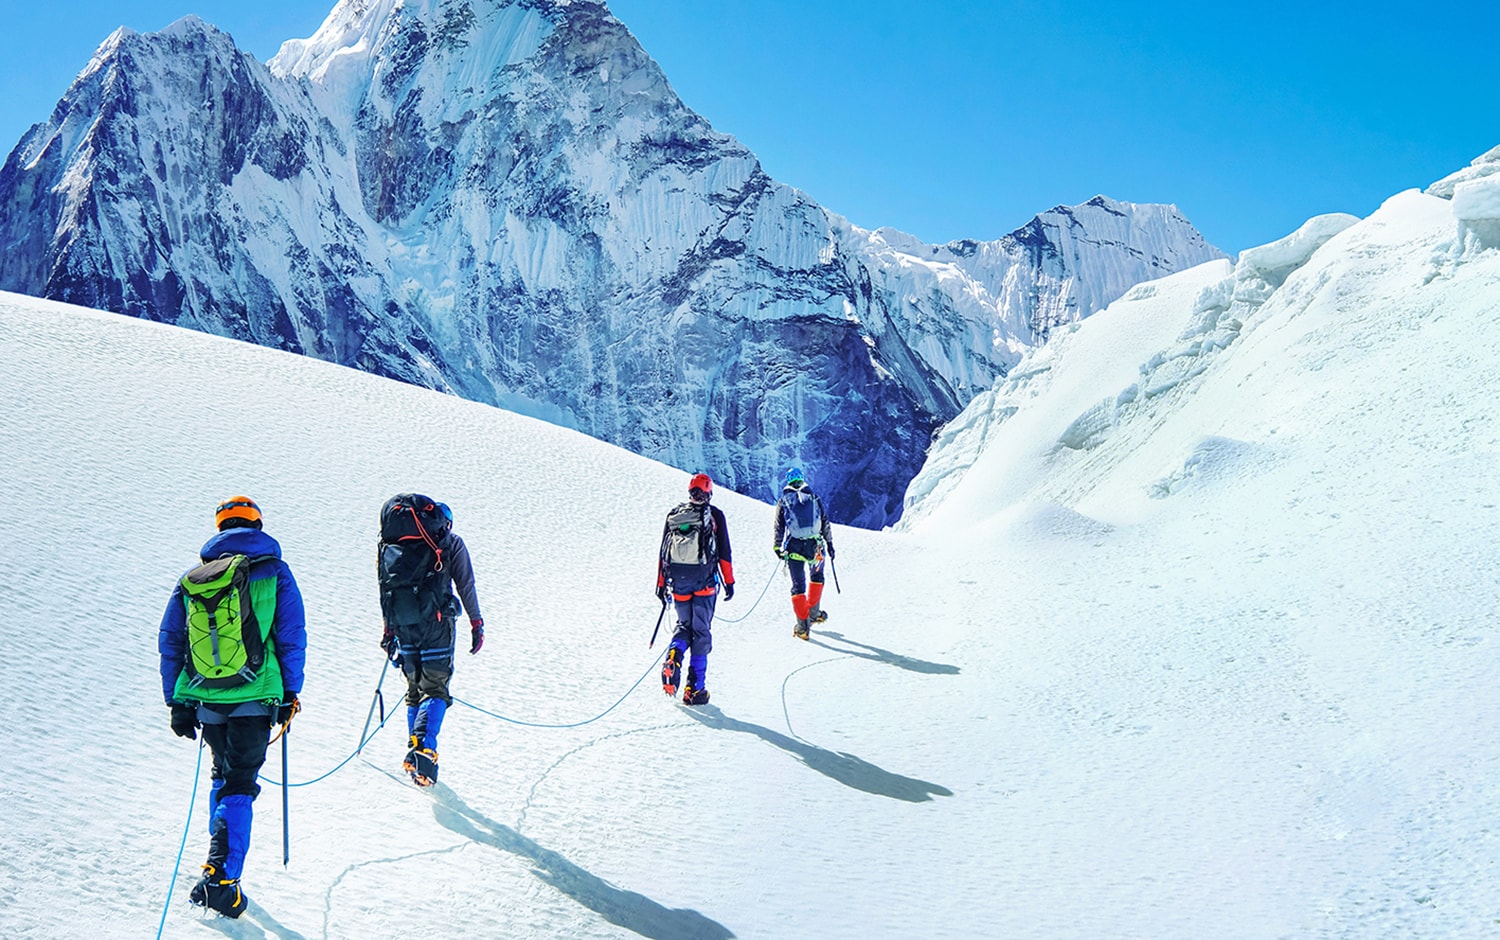 Group of climbers reaching the Everest summit in Nepal.